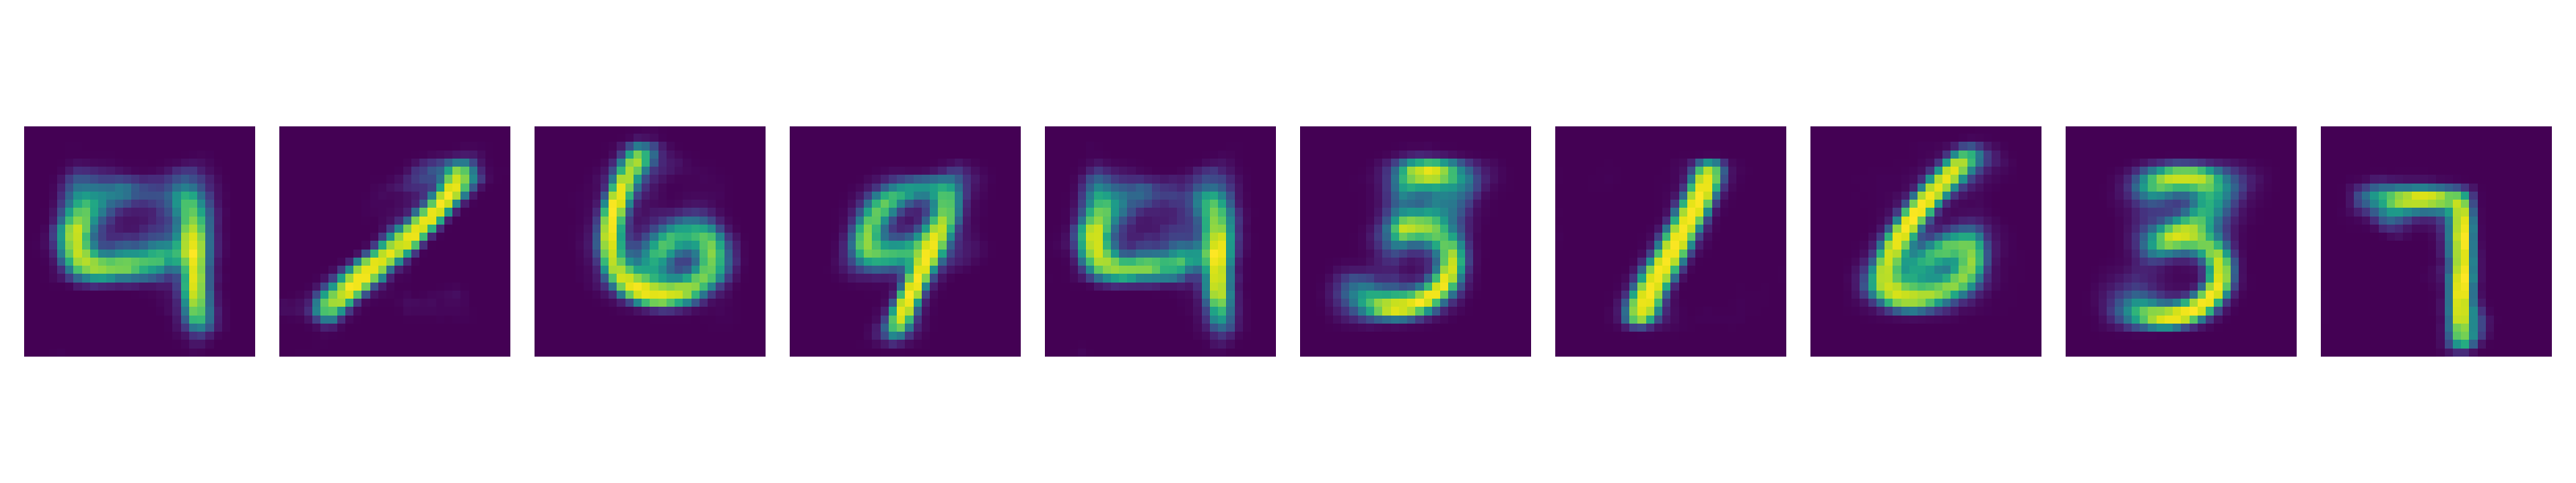 vae_mnist_deep_model_latent_dim2_sample_from_prior_epoch25_kld_weight1